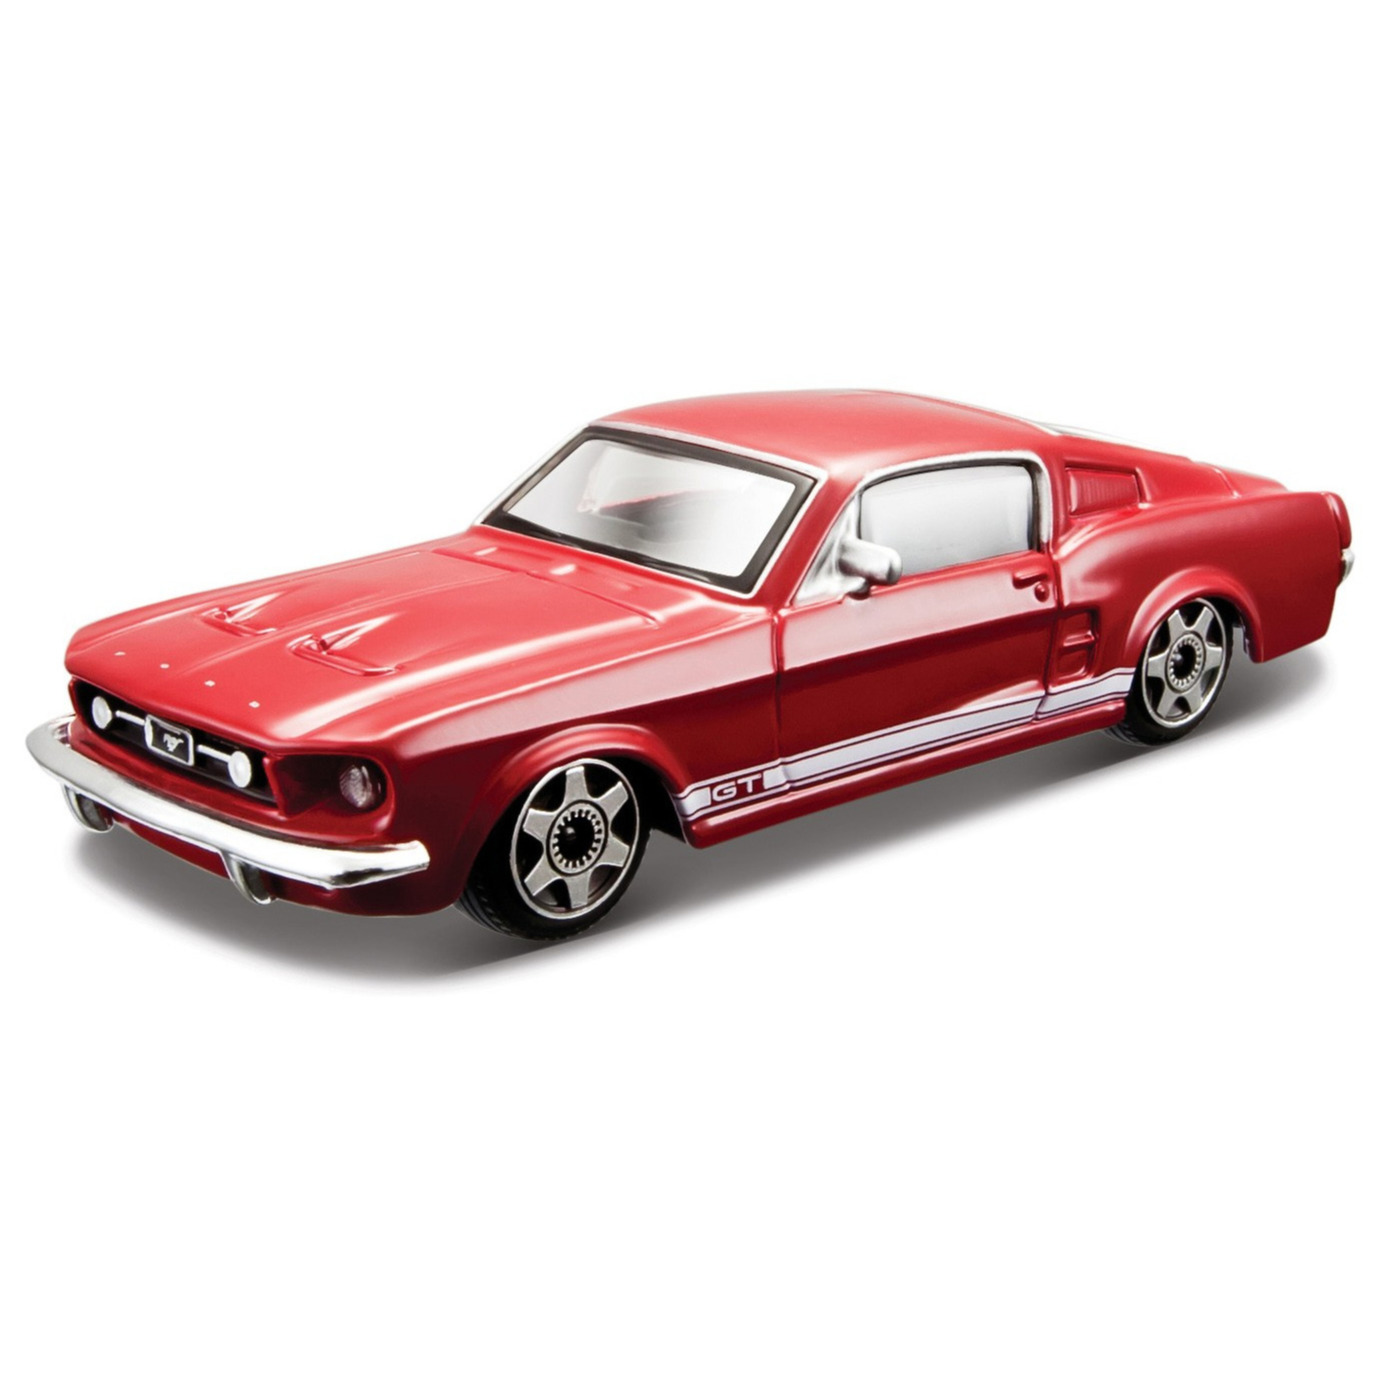 Speelgoed auto Ford Mustang GT 1964 rood 1:43